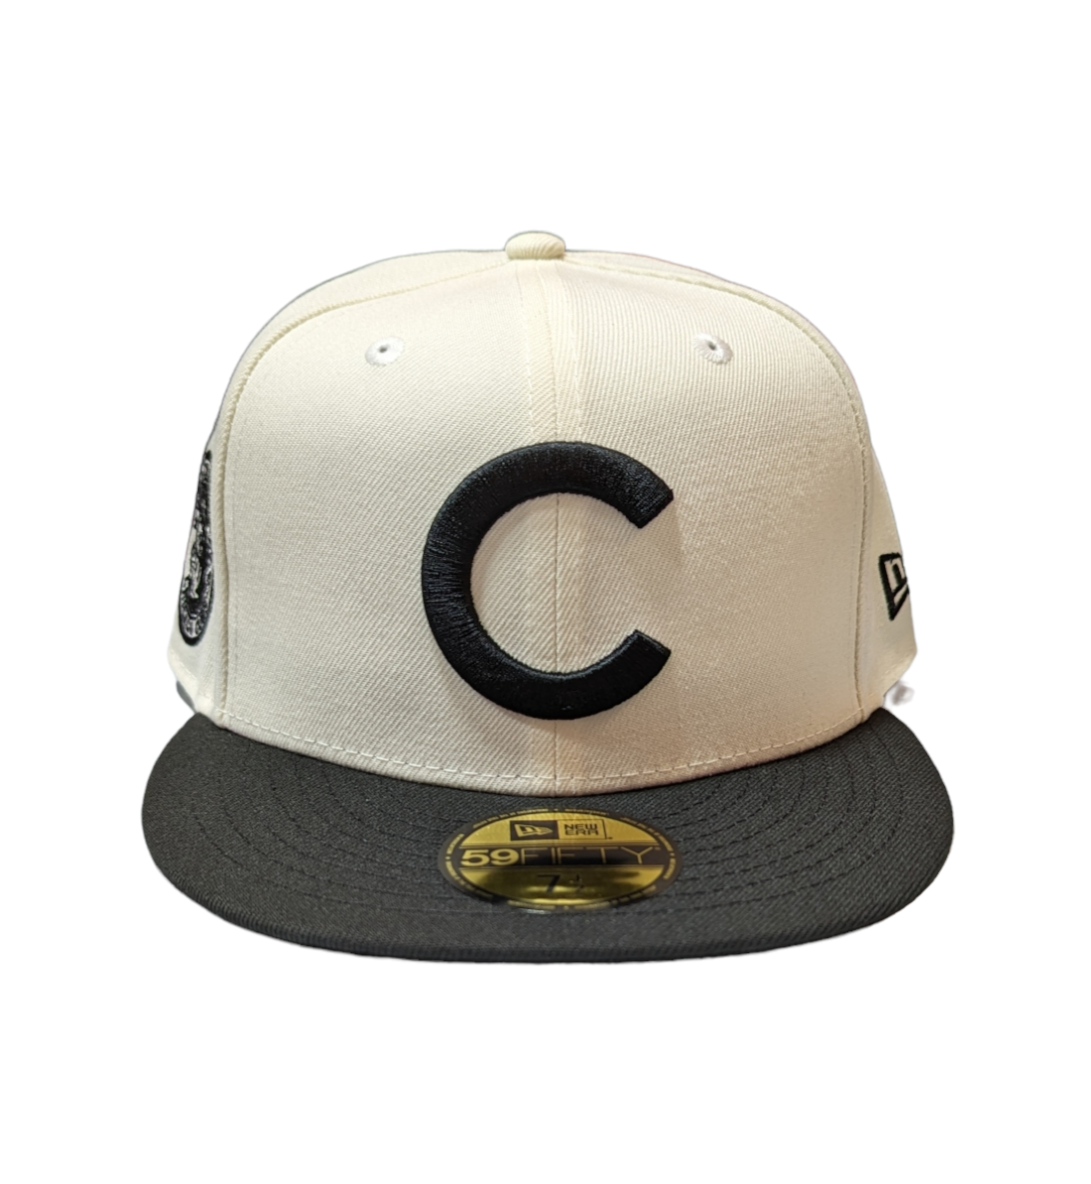 Chicago Cubs 1908 World Series Champions 2 Tone Chrome & Black New Era 59FIFTY Fitted Hat